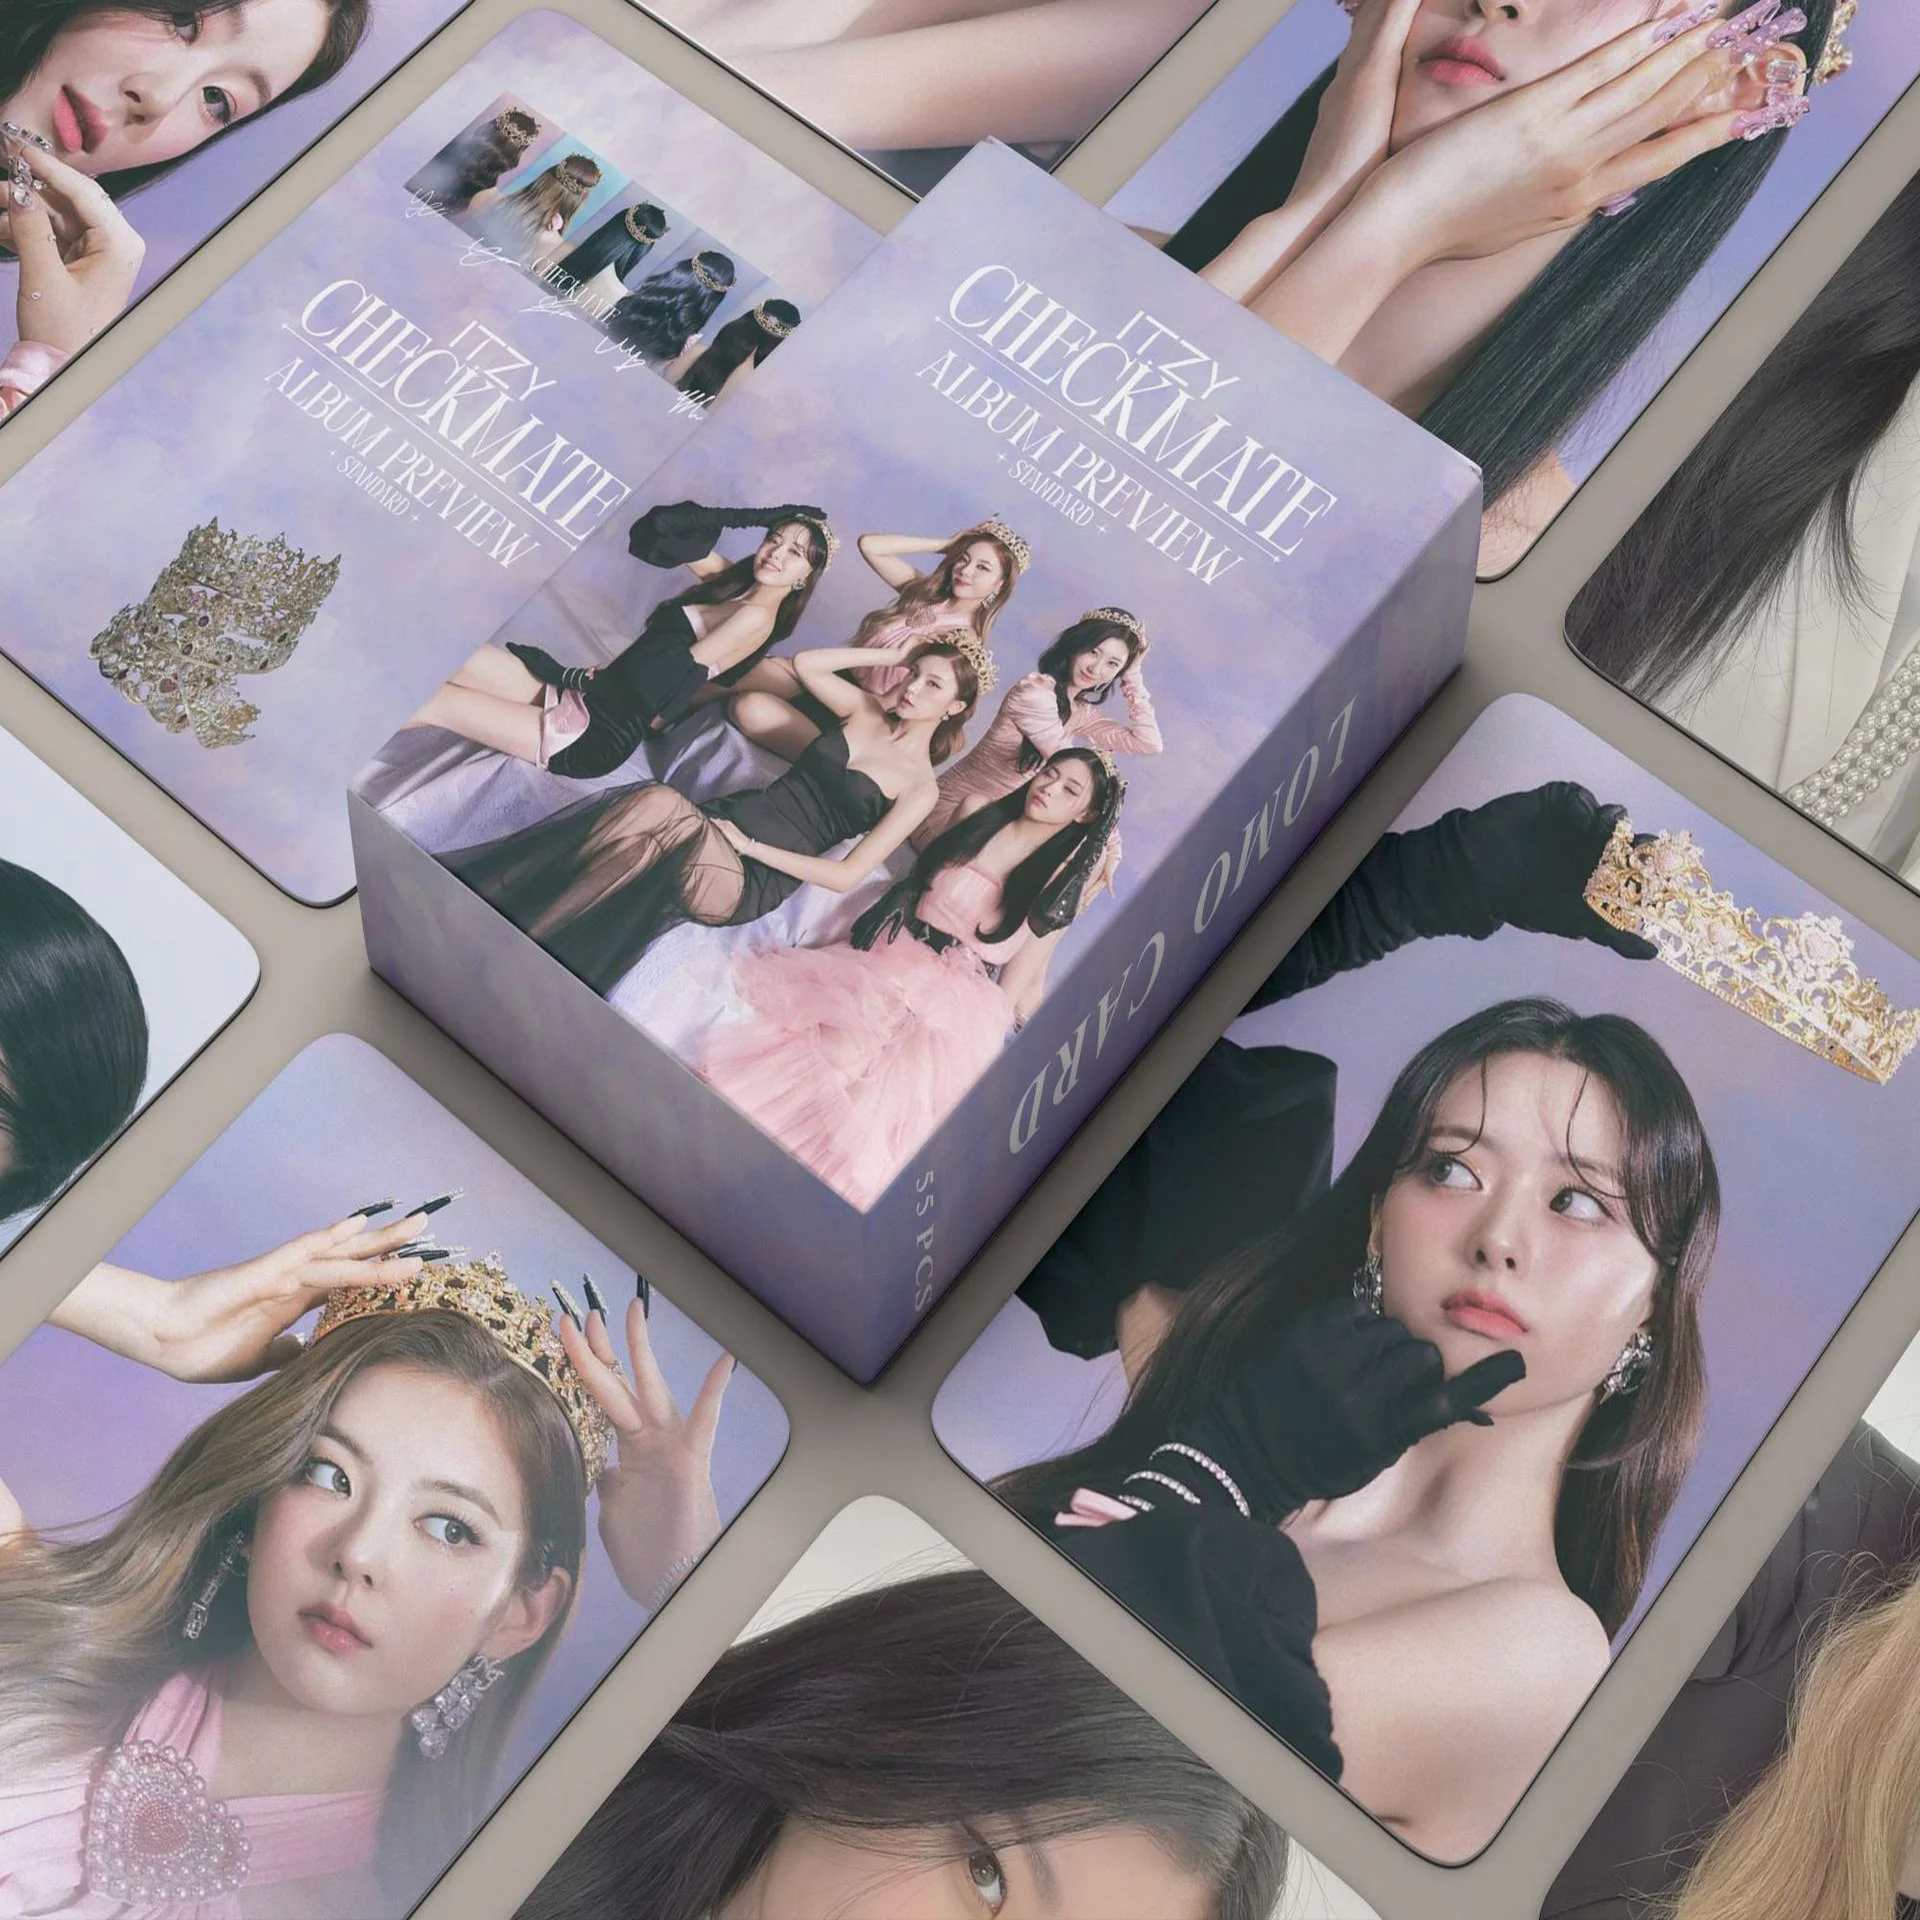 55pcs/set Kpop ITZY CHECKMATE BEST FRIENDS FOREVER Lomo Cards Greeting Season Photo album Cards Photocard Postcard Fashion 55pcs set kpop oh my girl lomo cards photo album real love postcard photo prints pictures fans gift new album cards